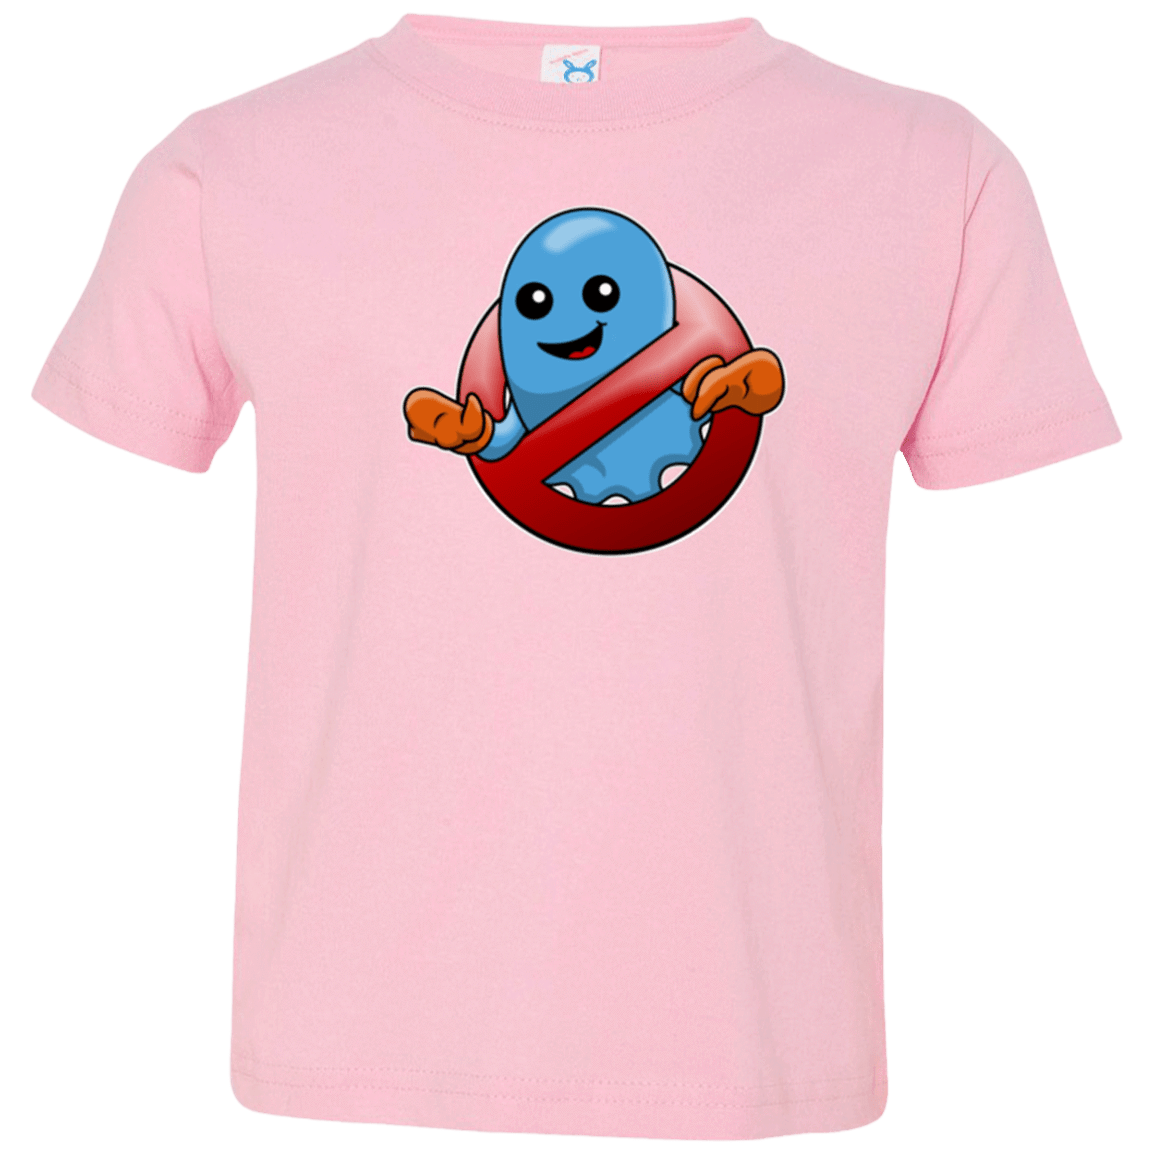 T-Shirts Pink / 2T Inky Buster Toddler Premium T-Shirt